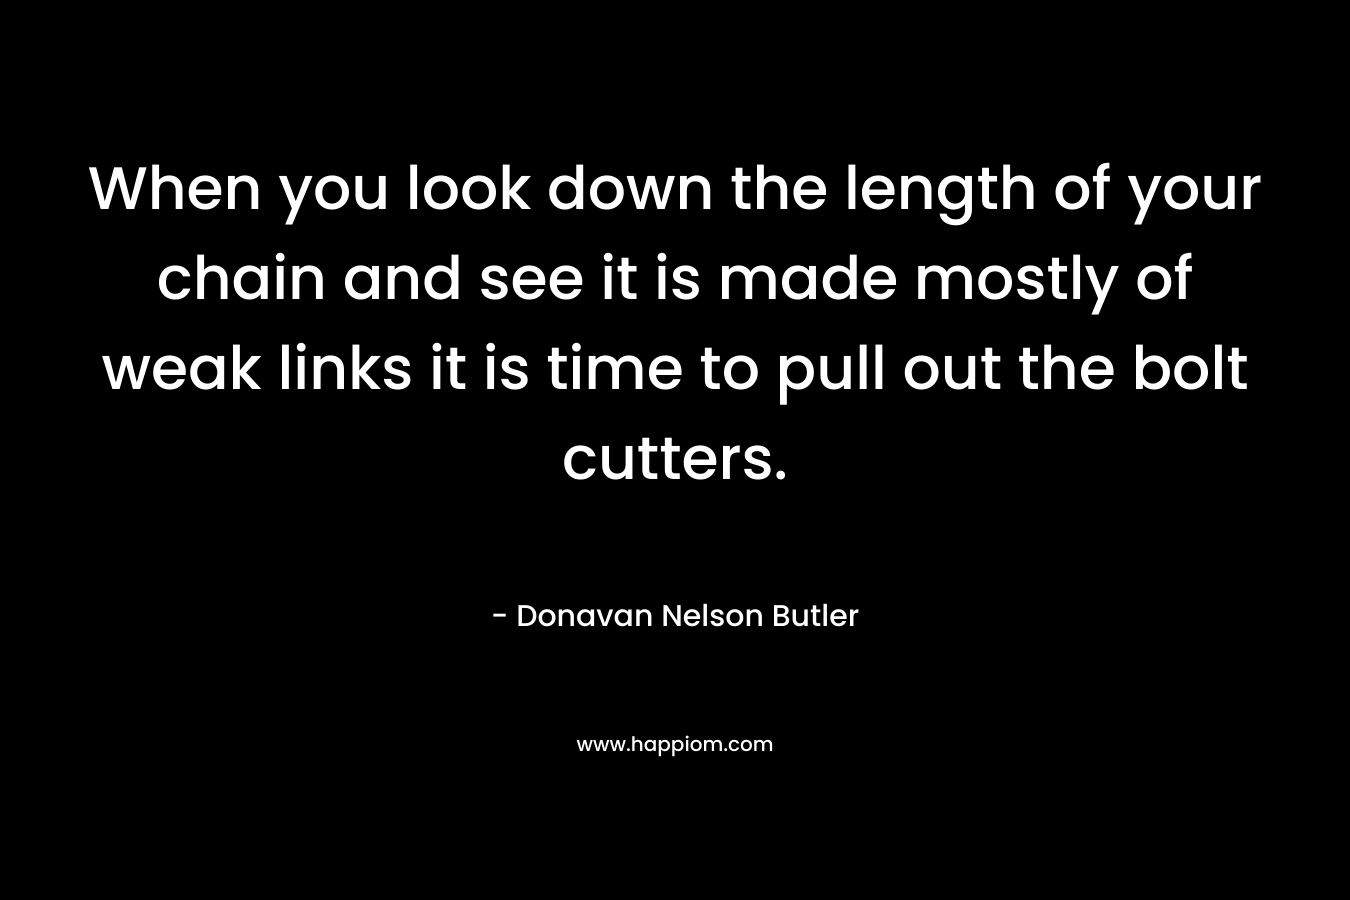 When you look down the length of your chain and see it is made mostly of weak links it is time to pull out the bolt cutters. – Donavan Nelson Butler